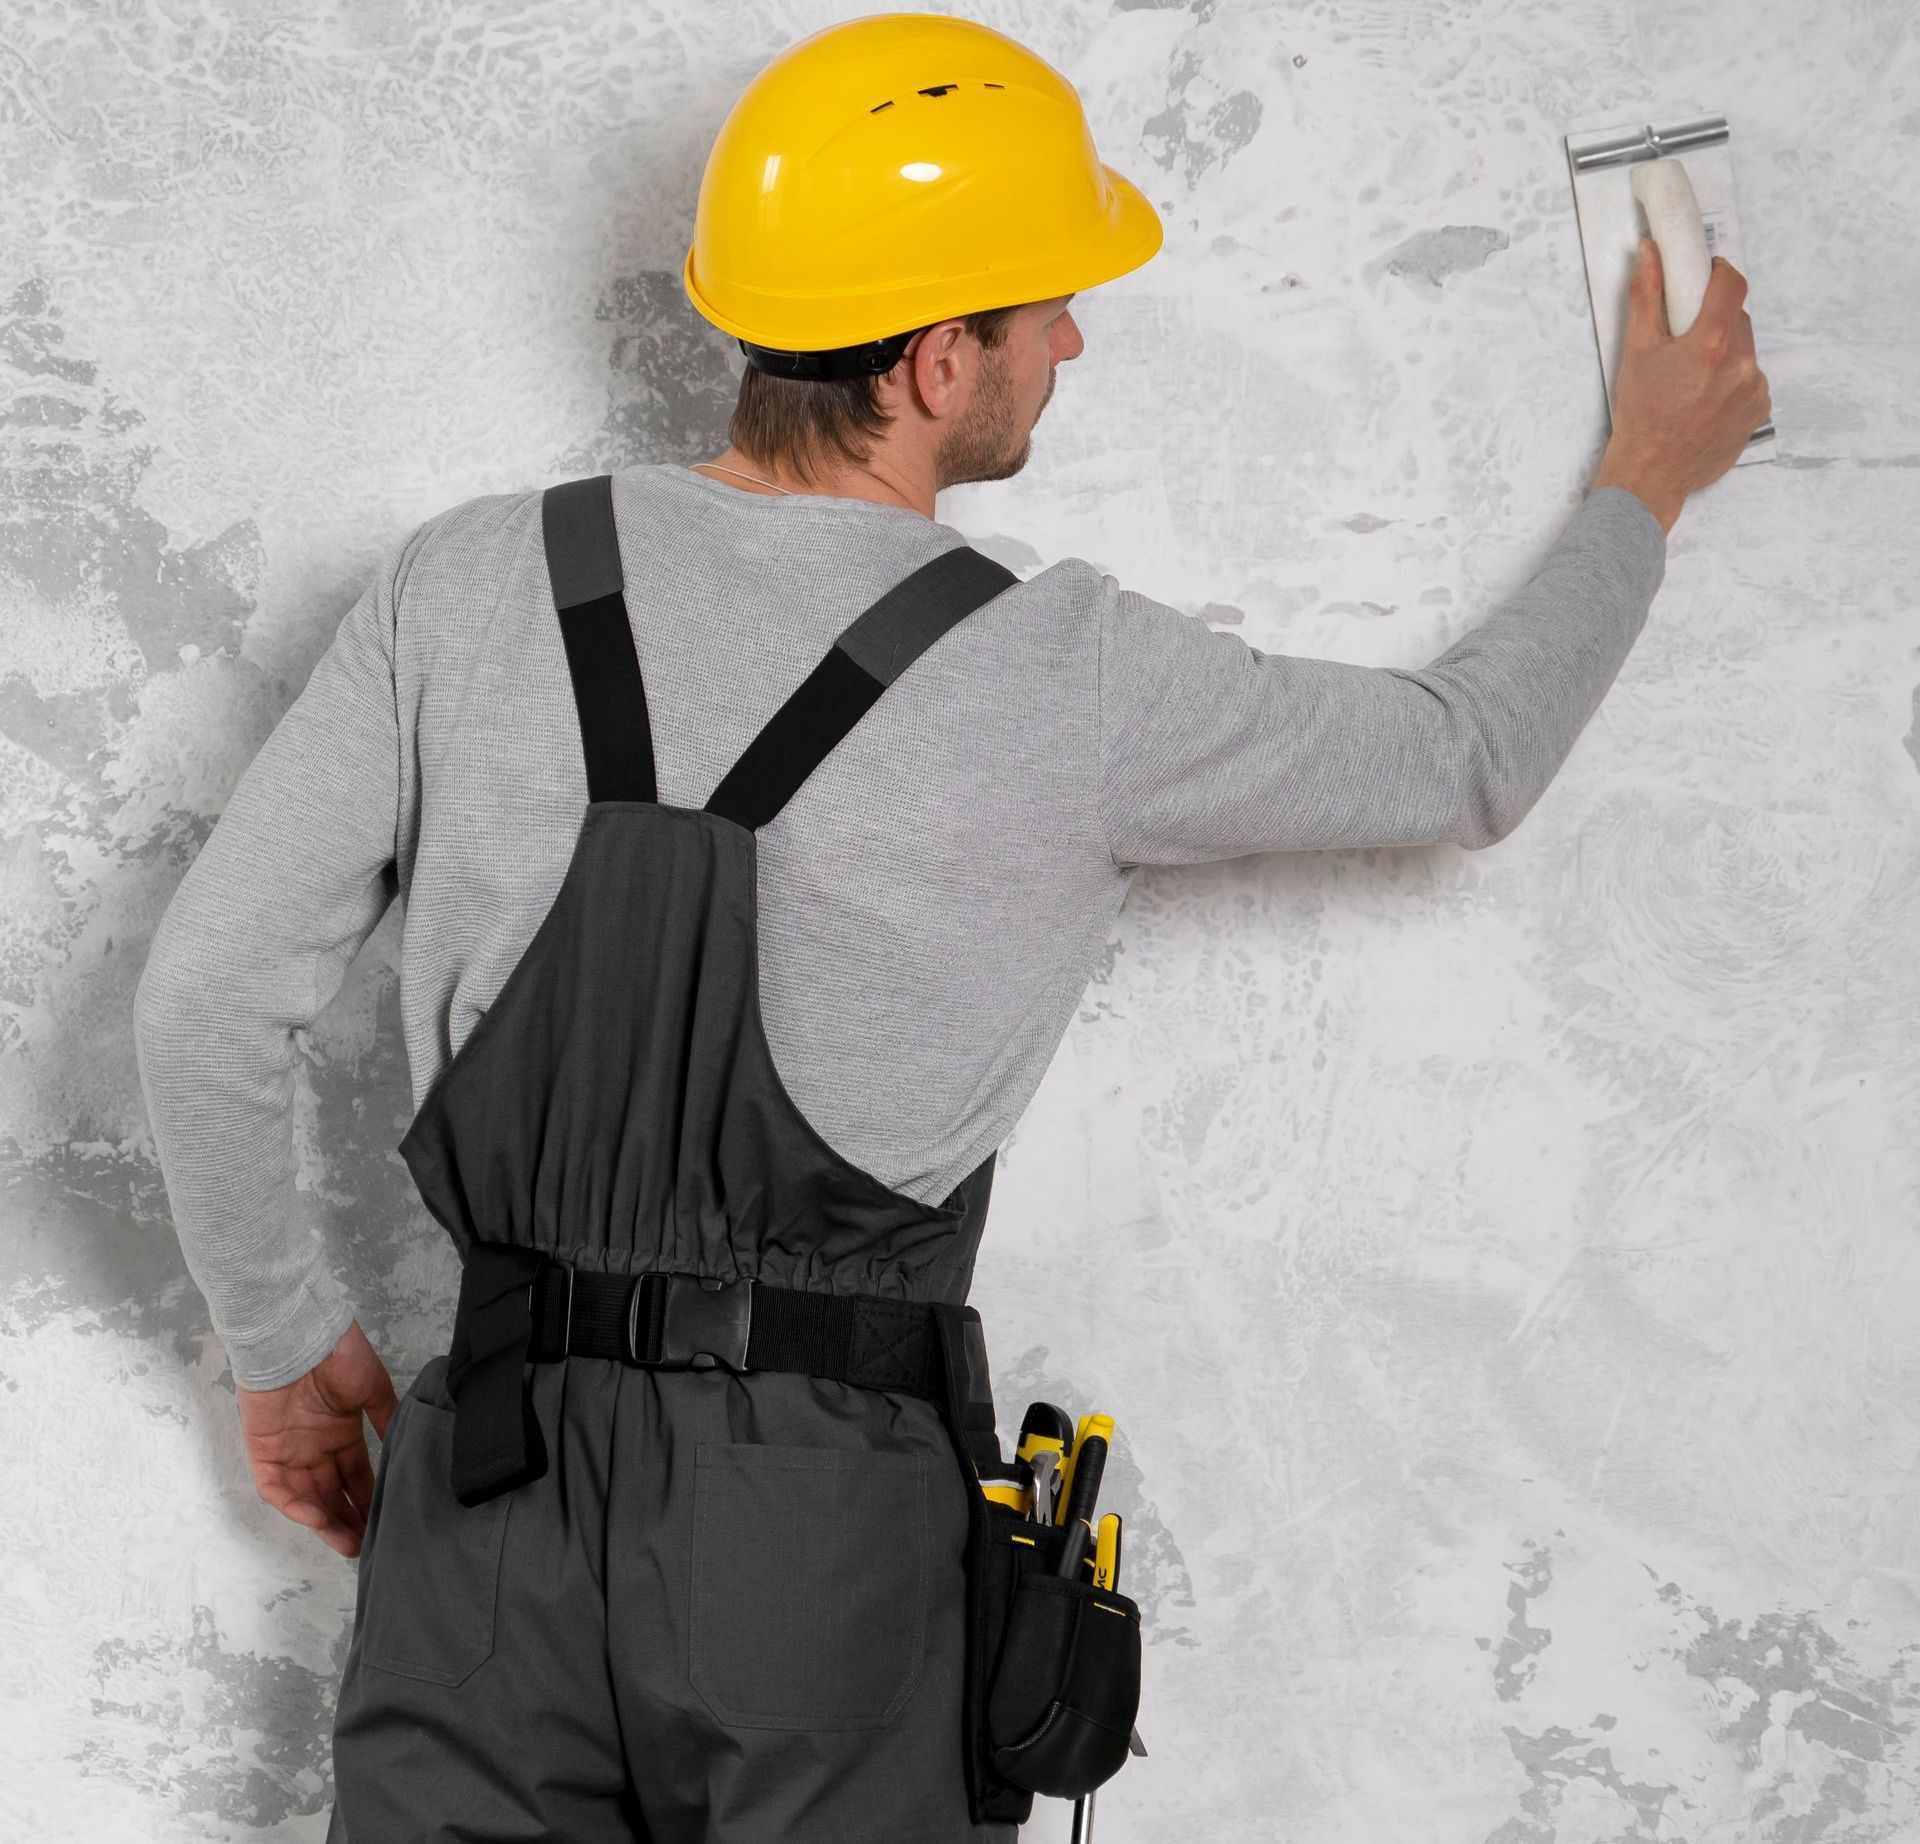 a man wearing a yellow hard hat and overalls is holding a tool against a wall